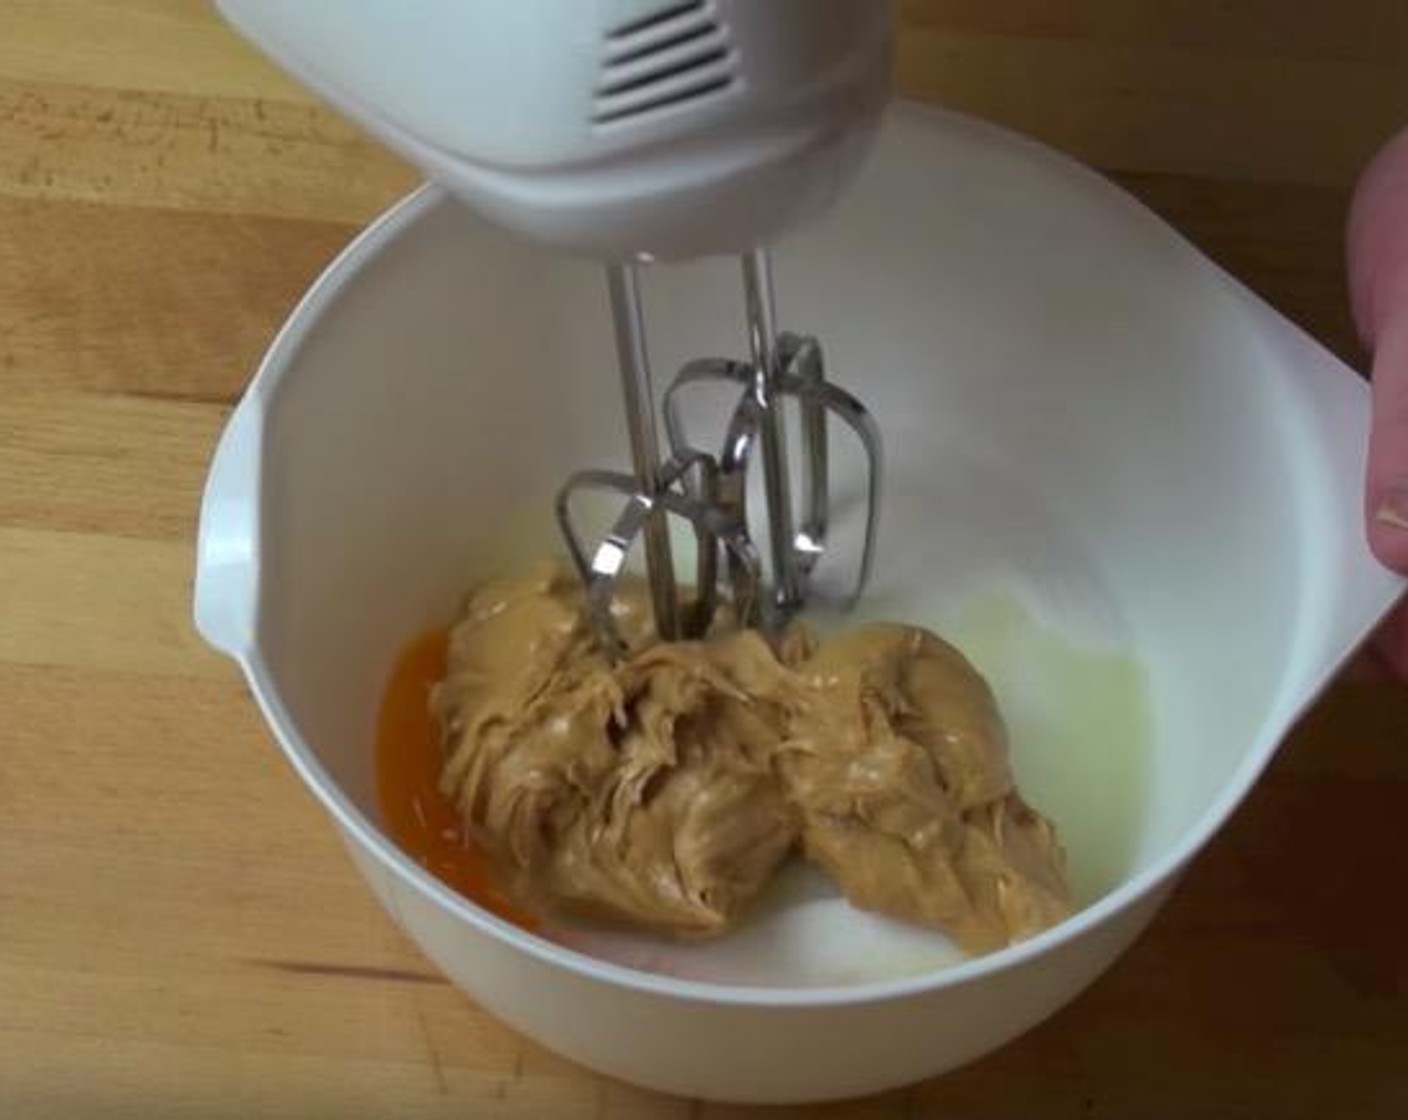 step 1 Put Caster Sugar (1 cup), Egg (1) and Peanut Butter (1 cup) into a mixing bowl. Use an electric mixer to beat everything together until it's combined and smooth.